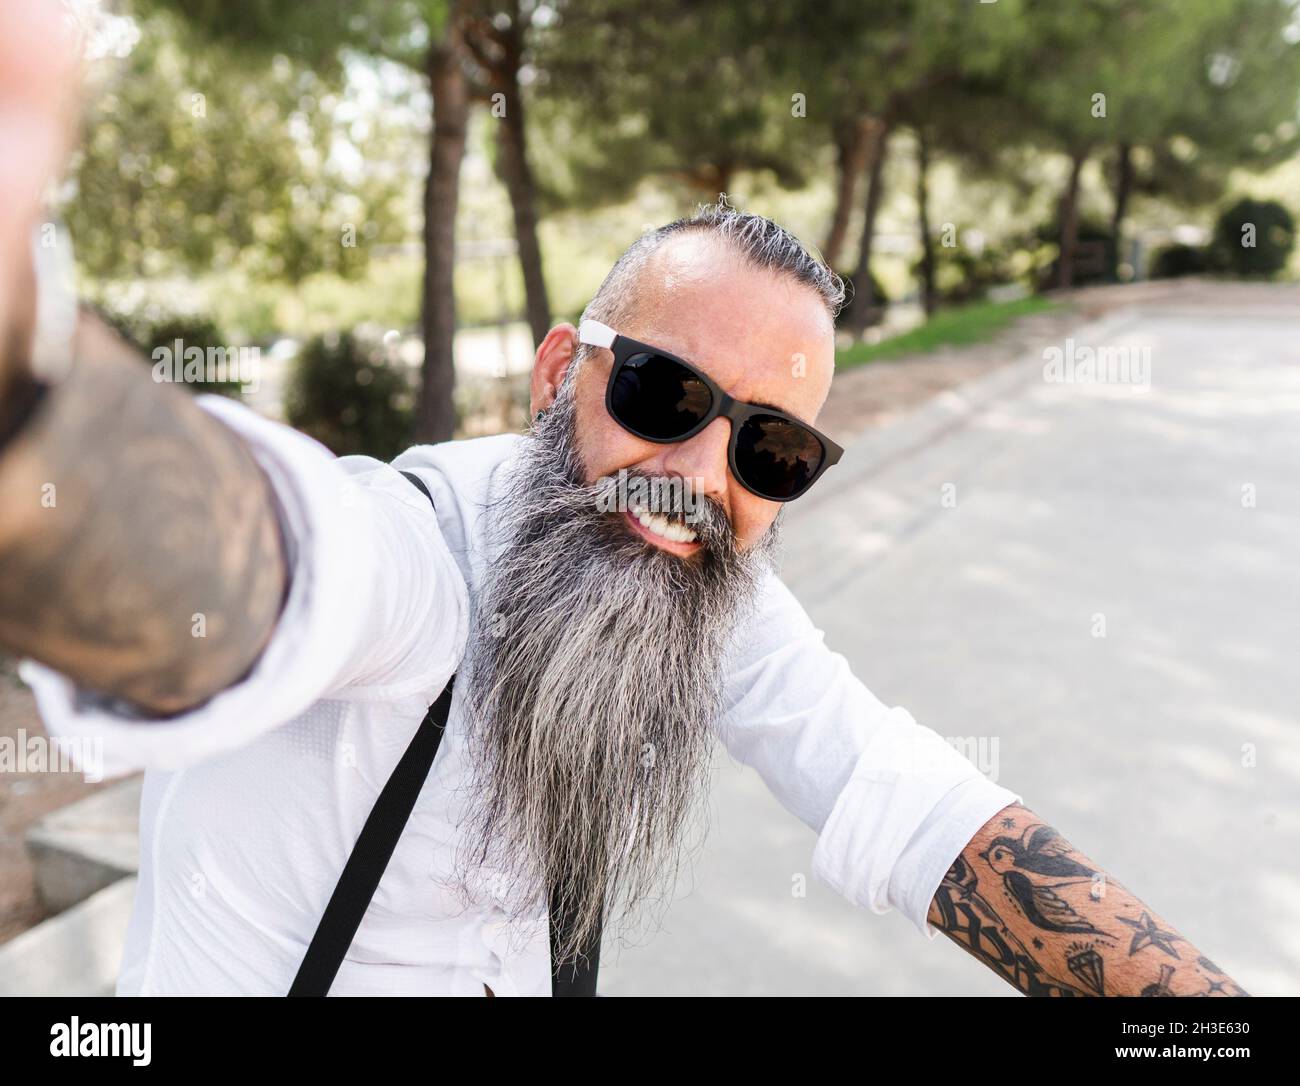 Positive bearded male in sunglasses and white shirt taking self portrait on smartphone while sitting on bicycle in park with trees Stock Photo